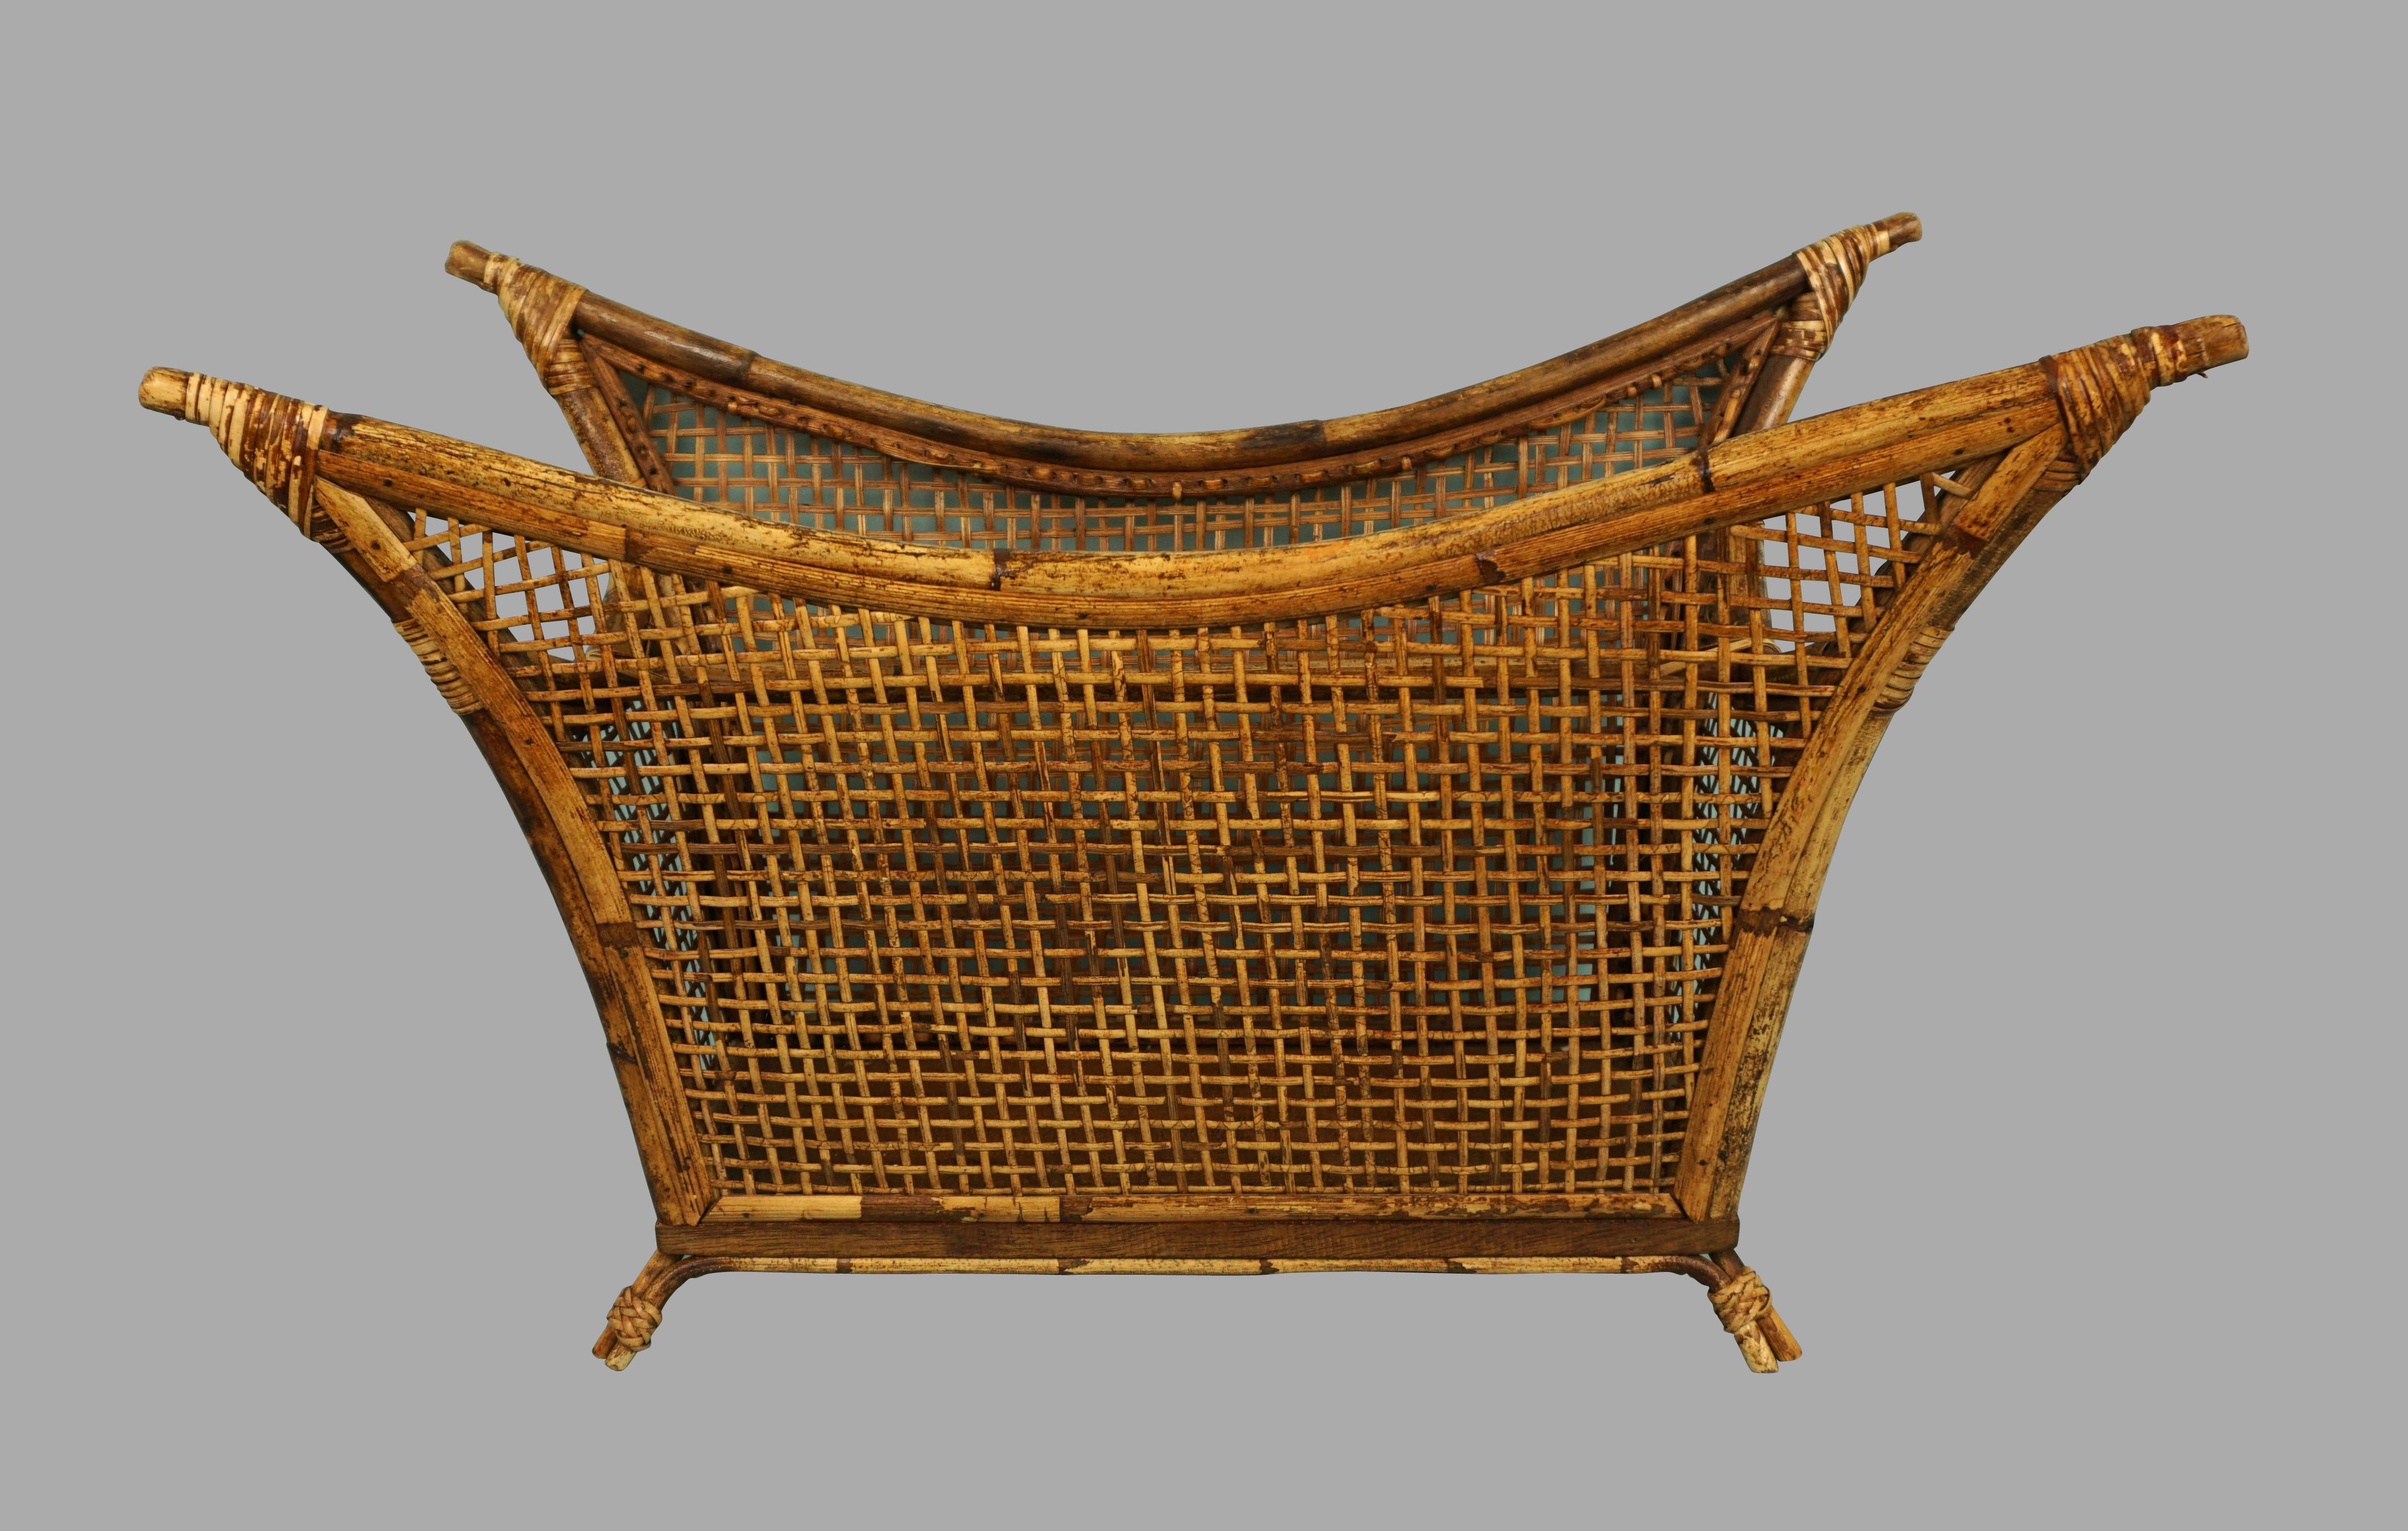 A rare bamboo and cane magazine rack by John and Elinor McGuire of San Francisco purchased from the estate of the original owner, circa 1970. This unusual item is in original condition and shows signs of careful use.